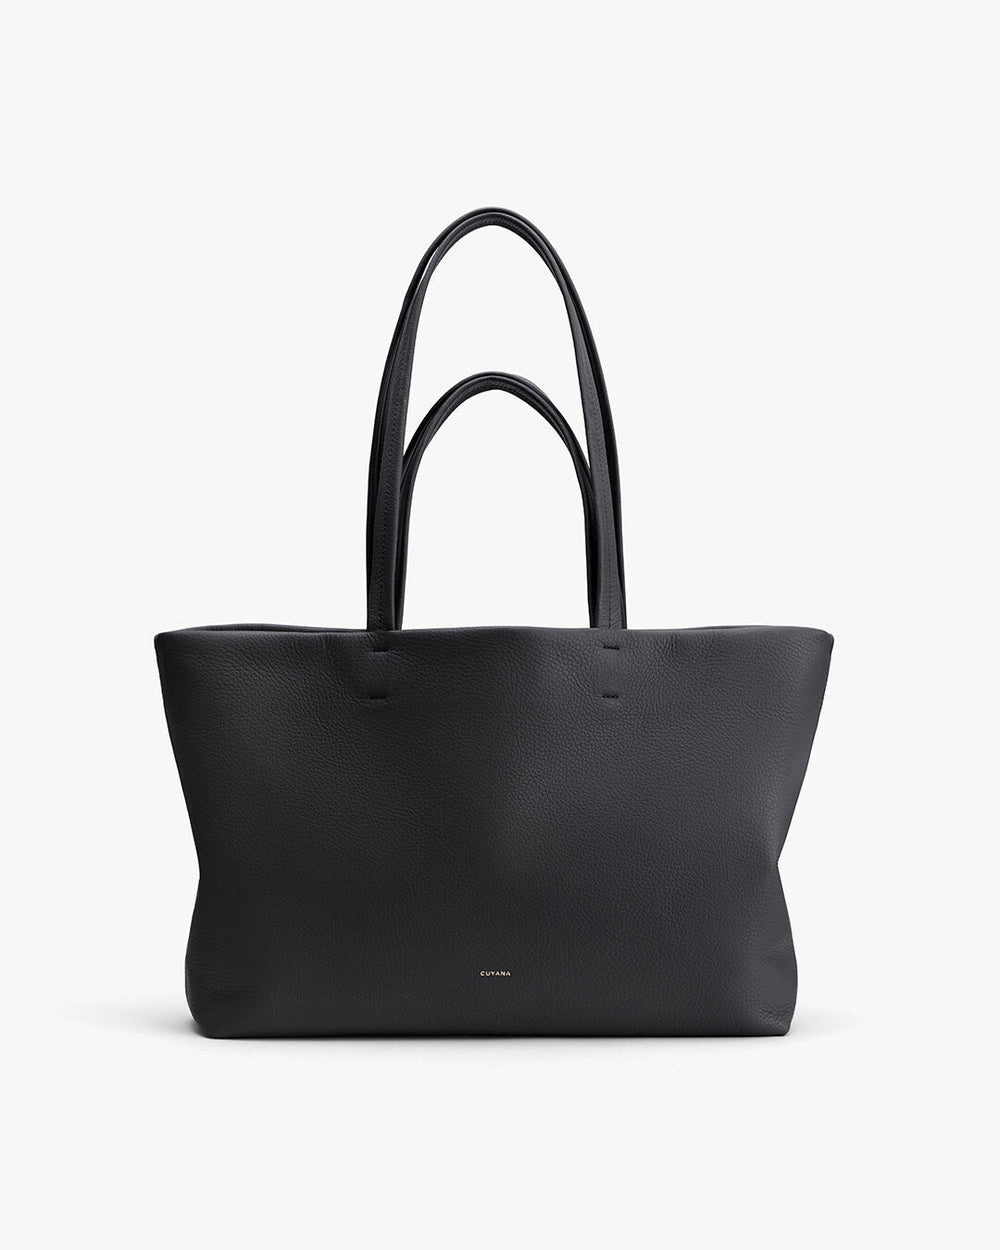 Small Easy Tote – Cuyana